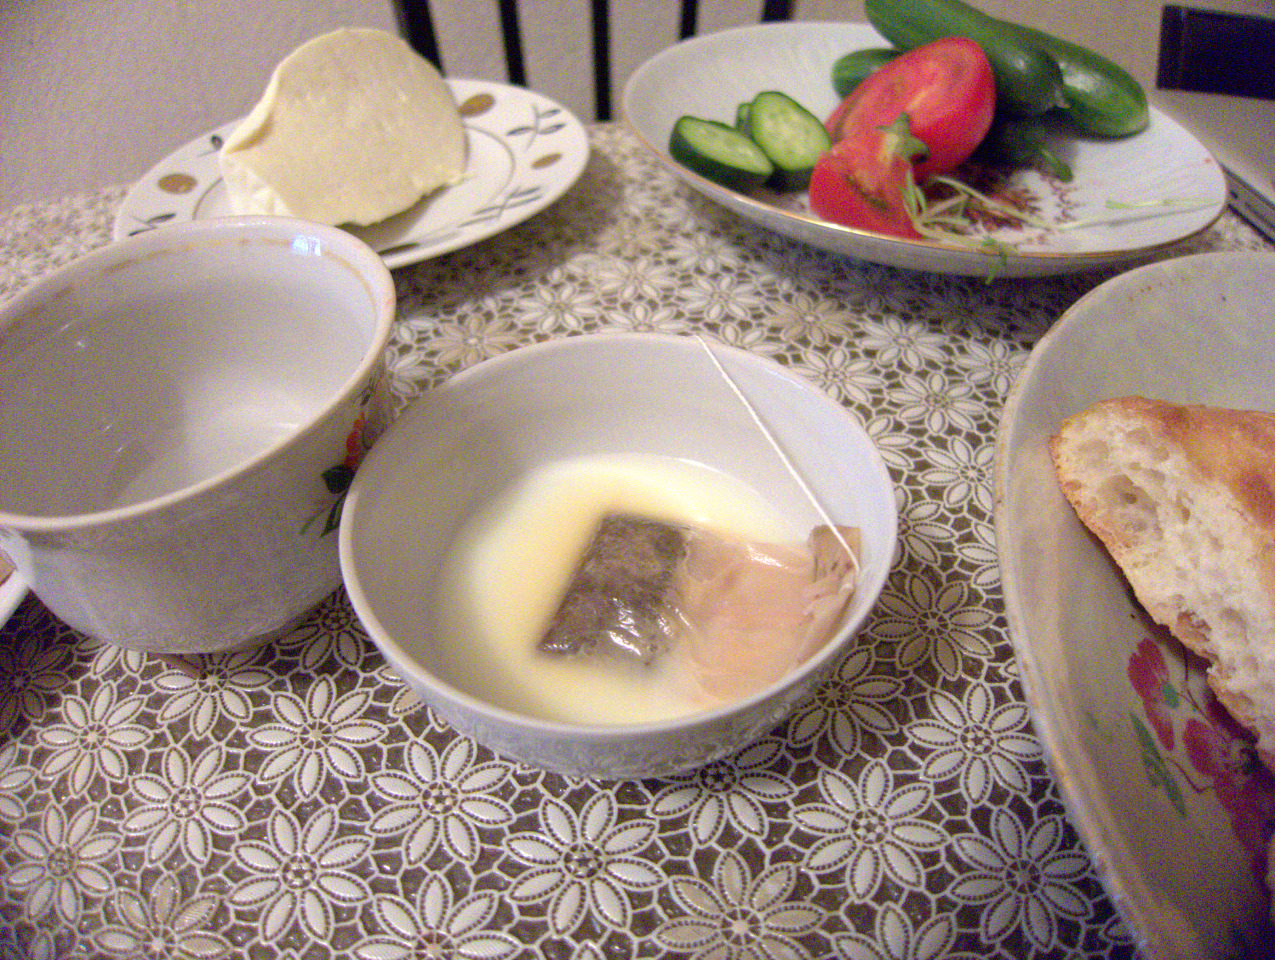 A table with bread,cheese,tea,tomatoes,and cucumbers on different dishes.